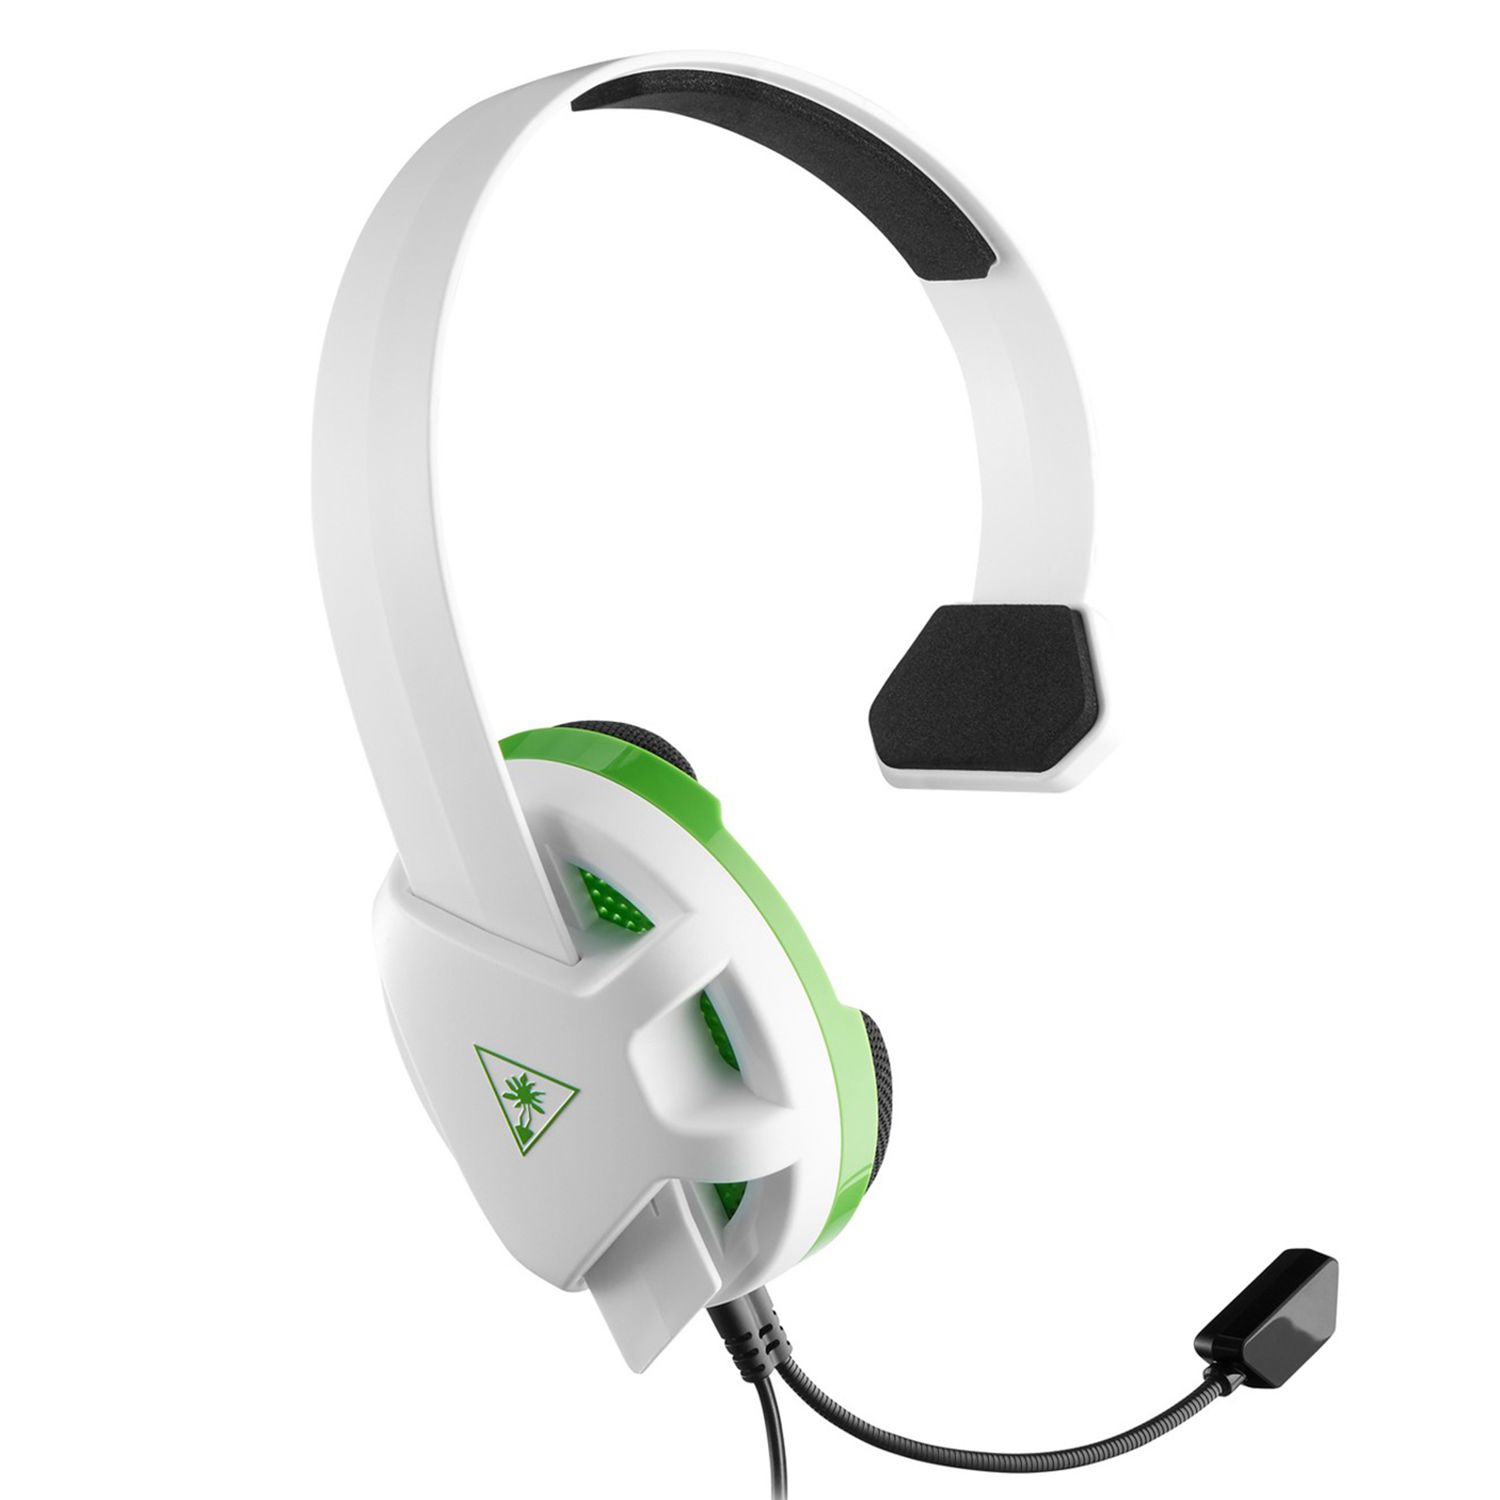 good gaming headphones for xbox one